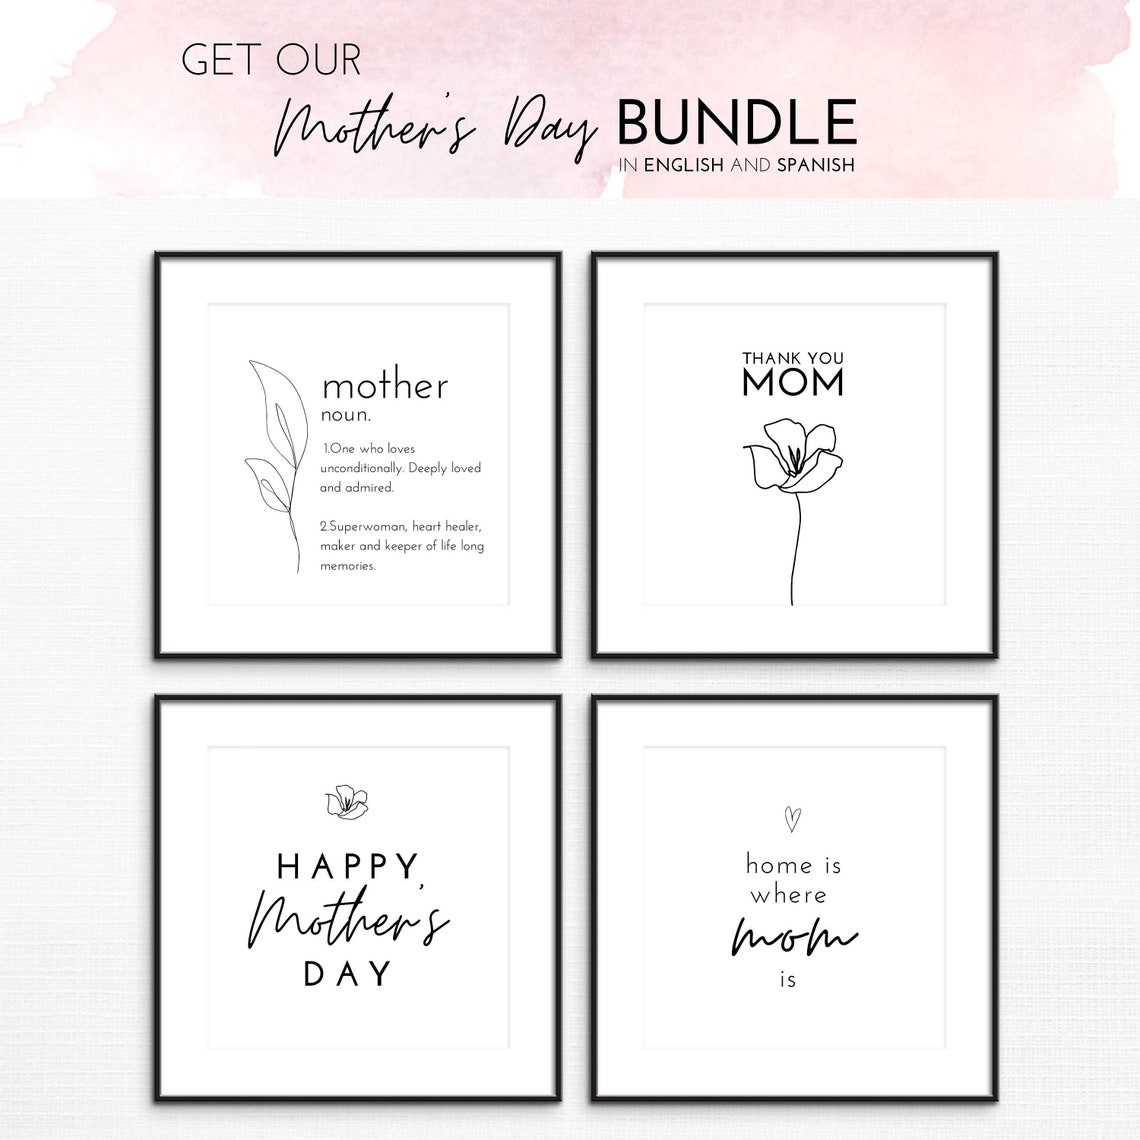 Mom Definition in English and in Spanish Printable Card